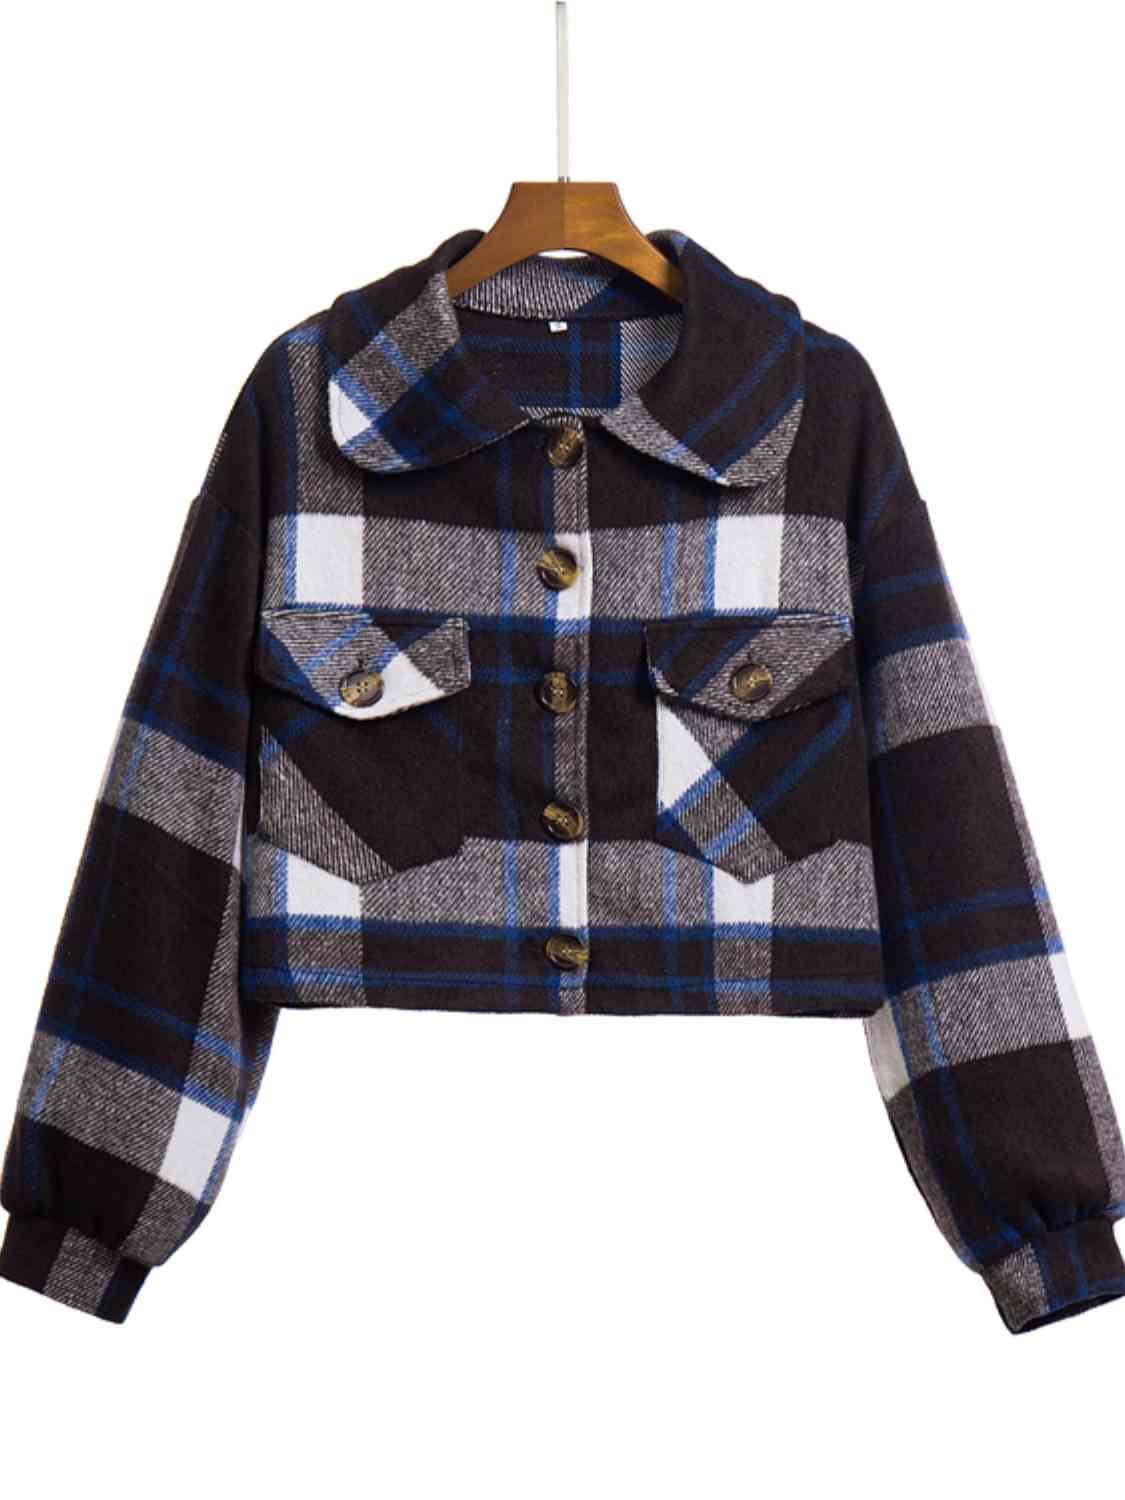 Plaid Button Front Jacket with Pockets - Guy Christopher